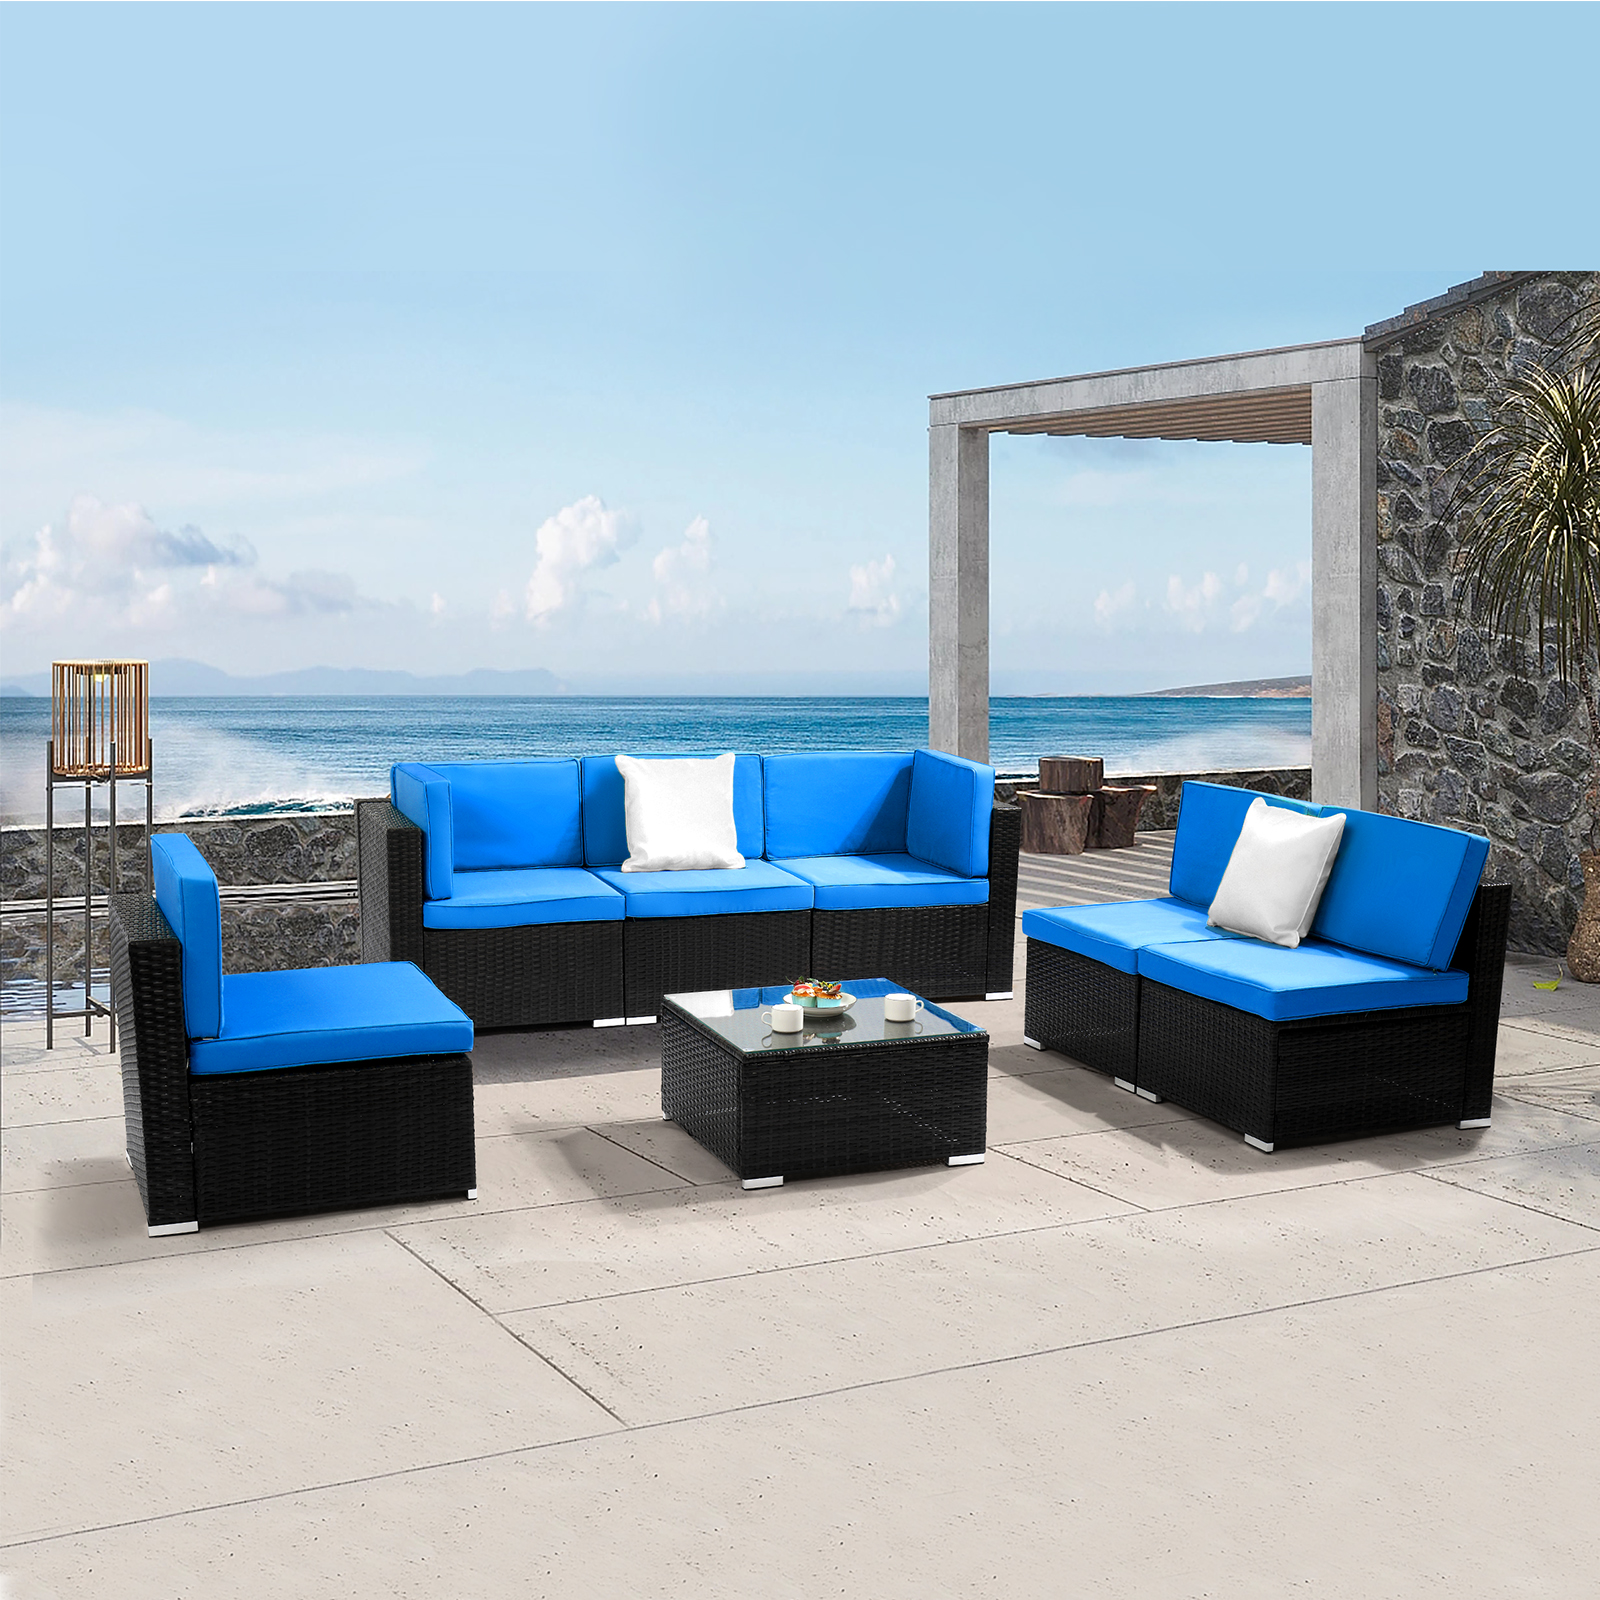 Zimtown 7PCS Outdoor Patio Sectional Set, Wicker Couch Sofa Set, Rattan Conversation Set, All Weather Chat Set for 6 Person, Blue and Black PE Rattan with Table - image 4 of 9